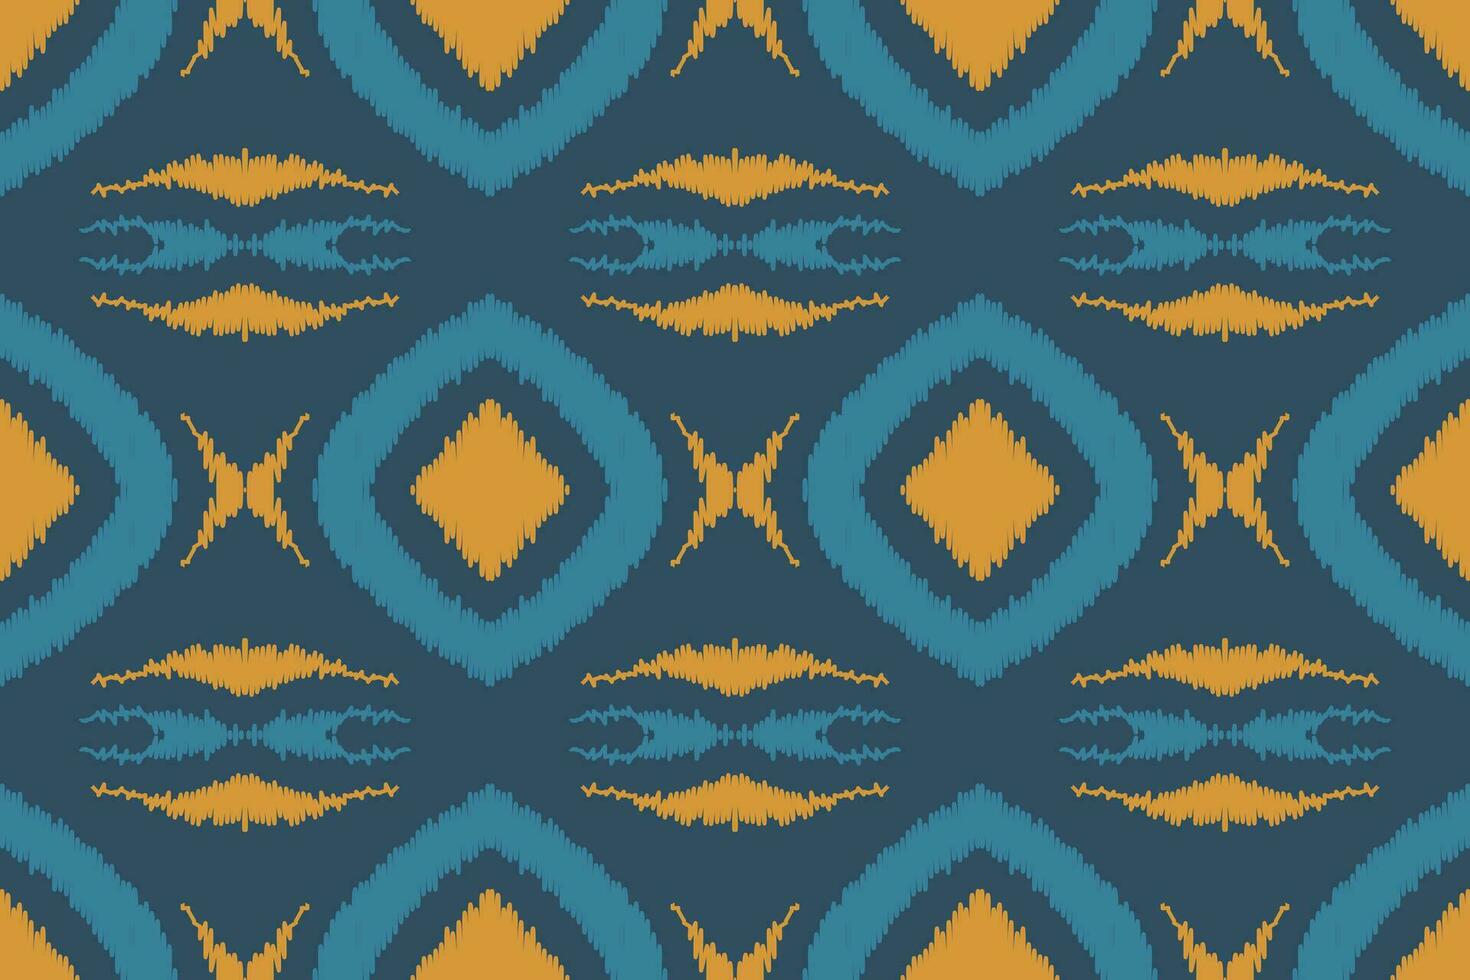 Ikat Fabric Paisley Embroidery Background. Ikat Triangle Geometric Ethnic Oriental Pattern traditional.aztec Style Abstract Vector illustration.design for Texture,fabric,clothing,wrapping,sarong.